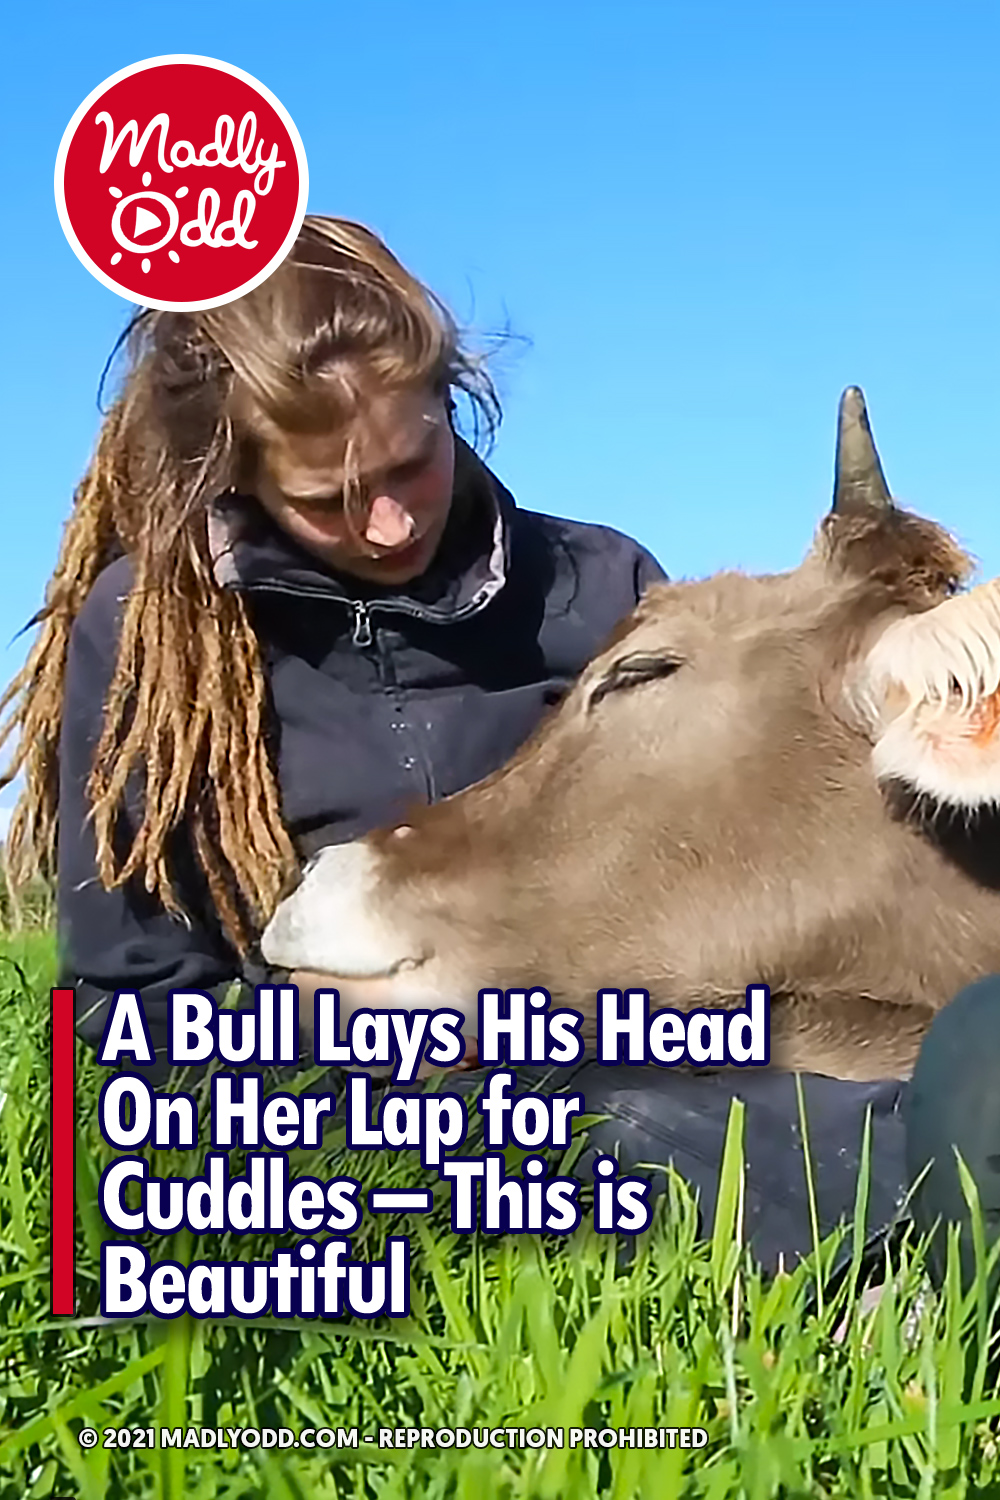 A Bull Lays His Head On Her Lap for Cuddles - This is Beautiful